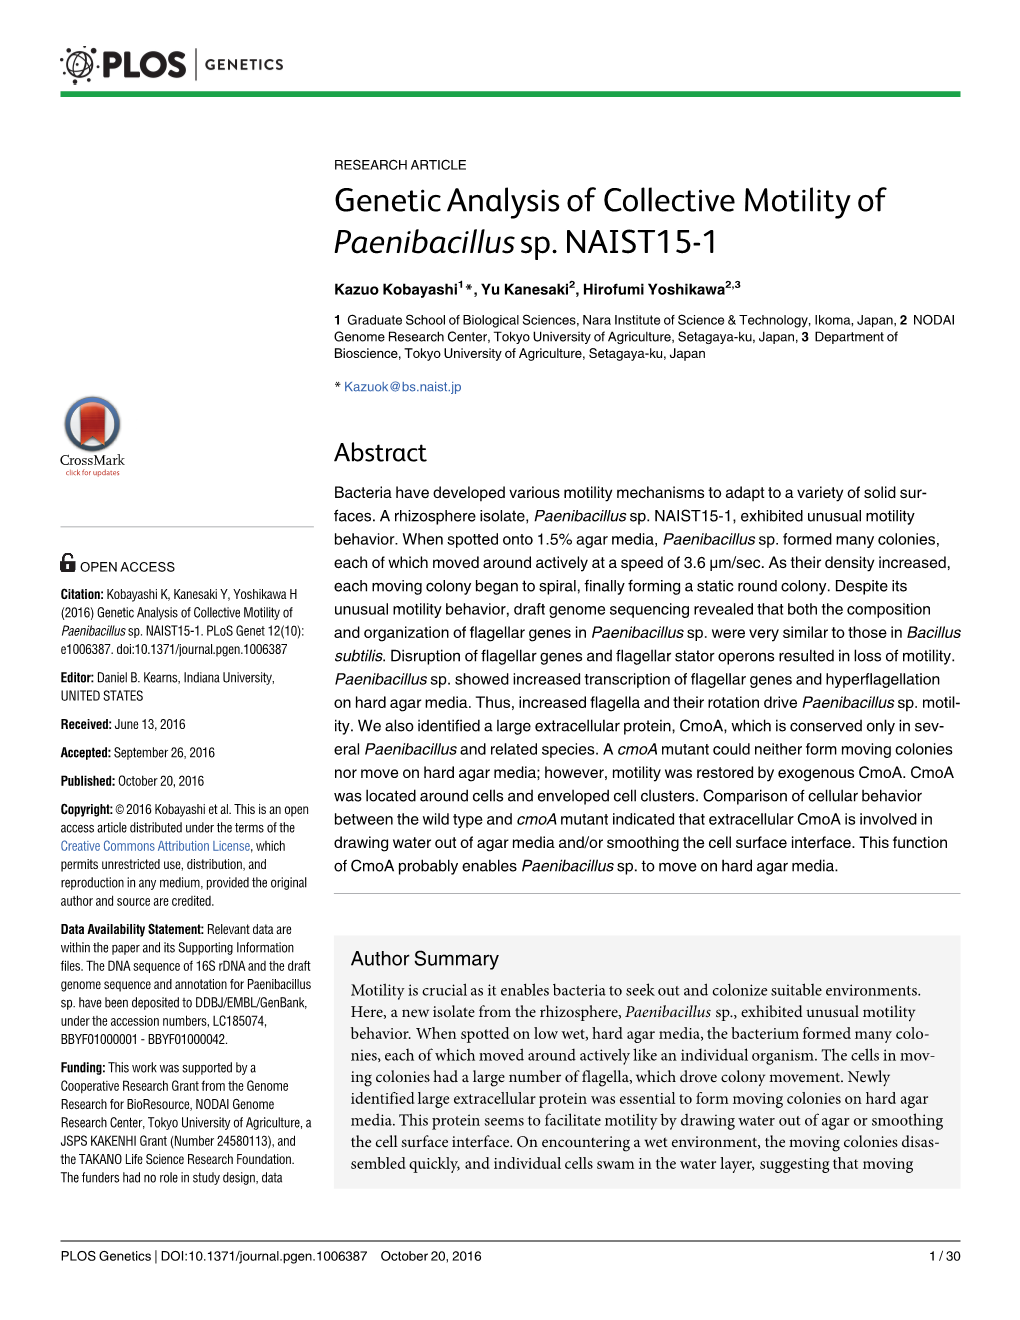 Genetic Analysis of Collective Motility of Paenibacillus Sp. NAIST15-1